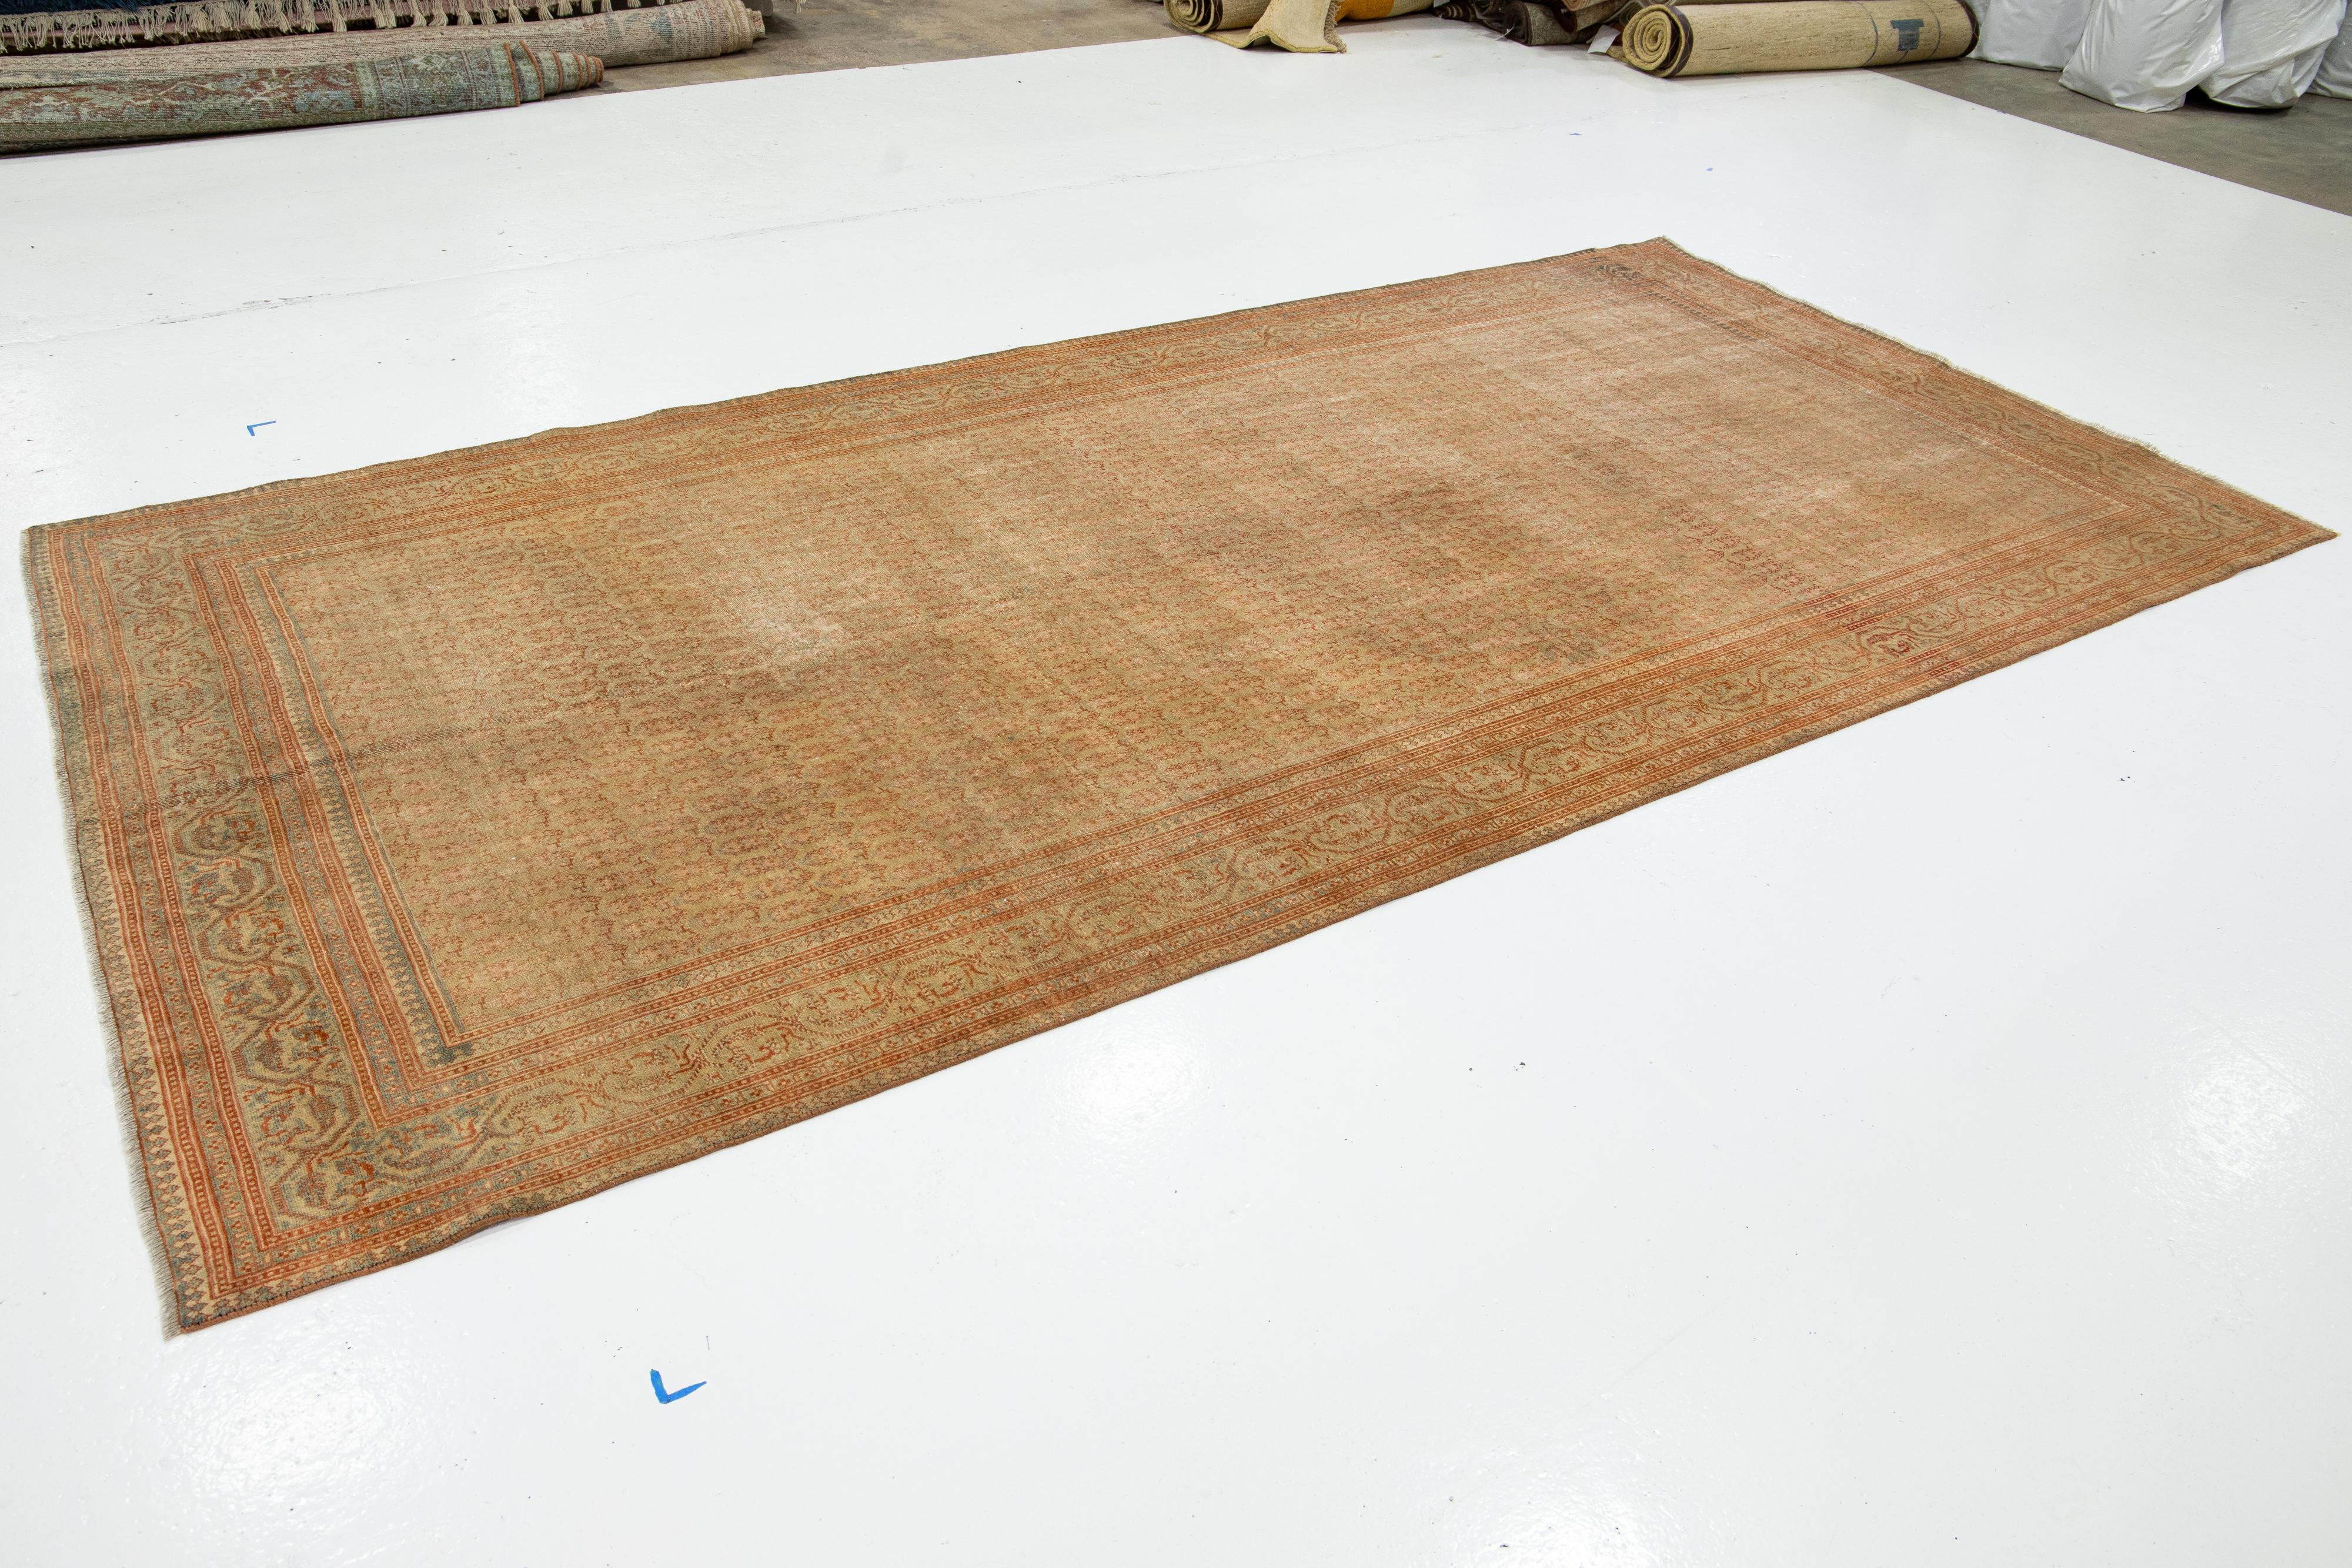 Hand-Knotted 1920s Antique Sivas Gallery Wool rug In Beige Tan Color With Allover Pattern For Sale